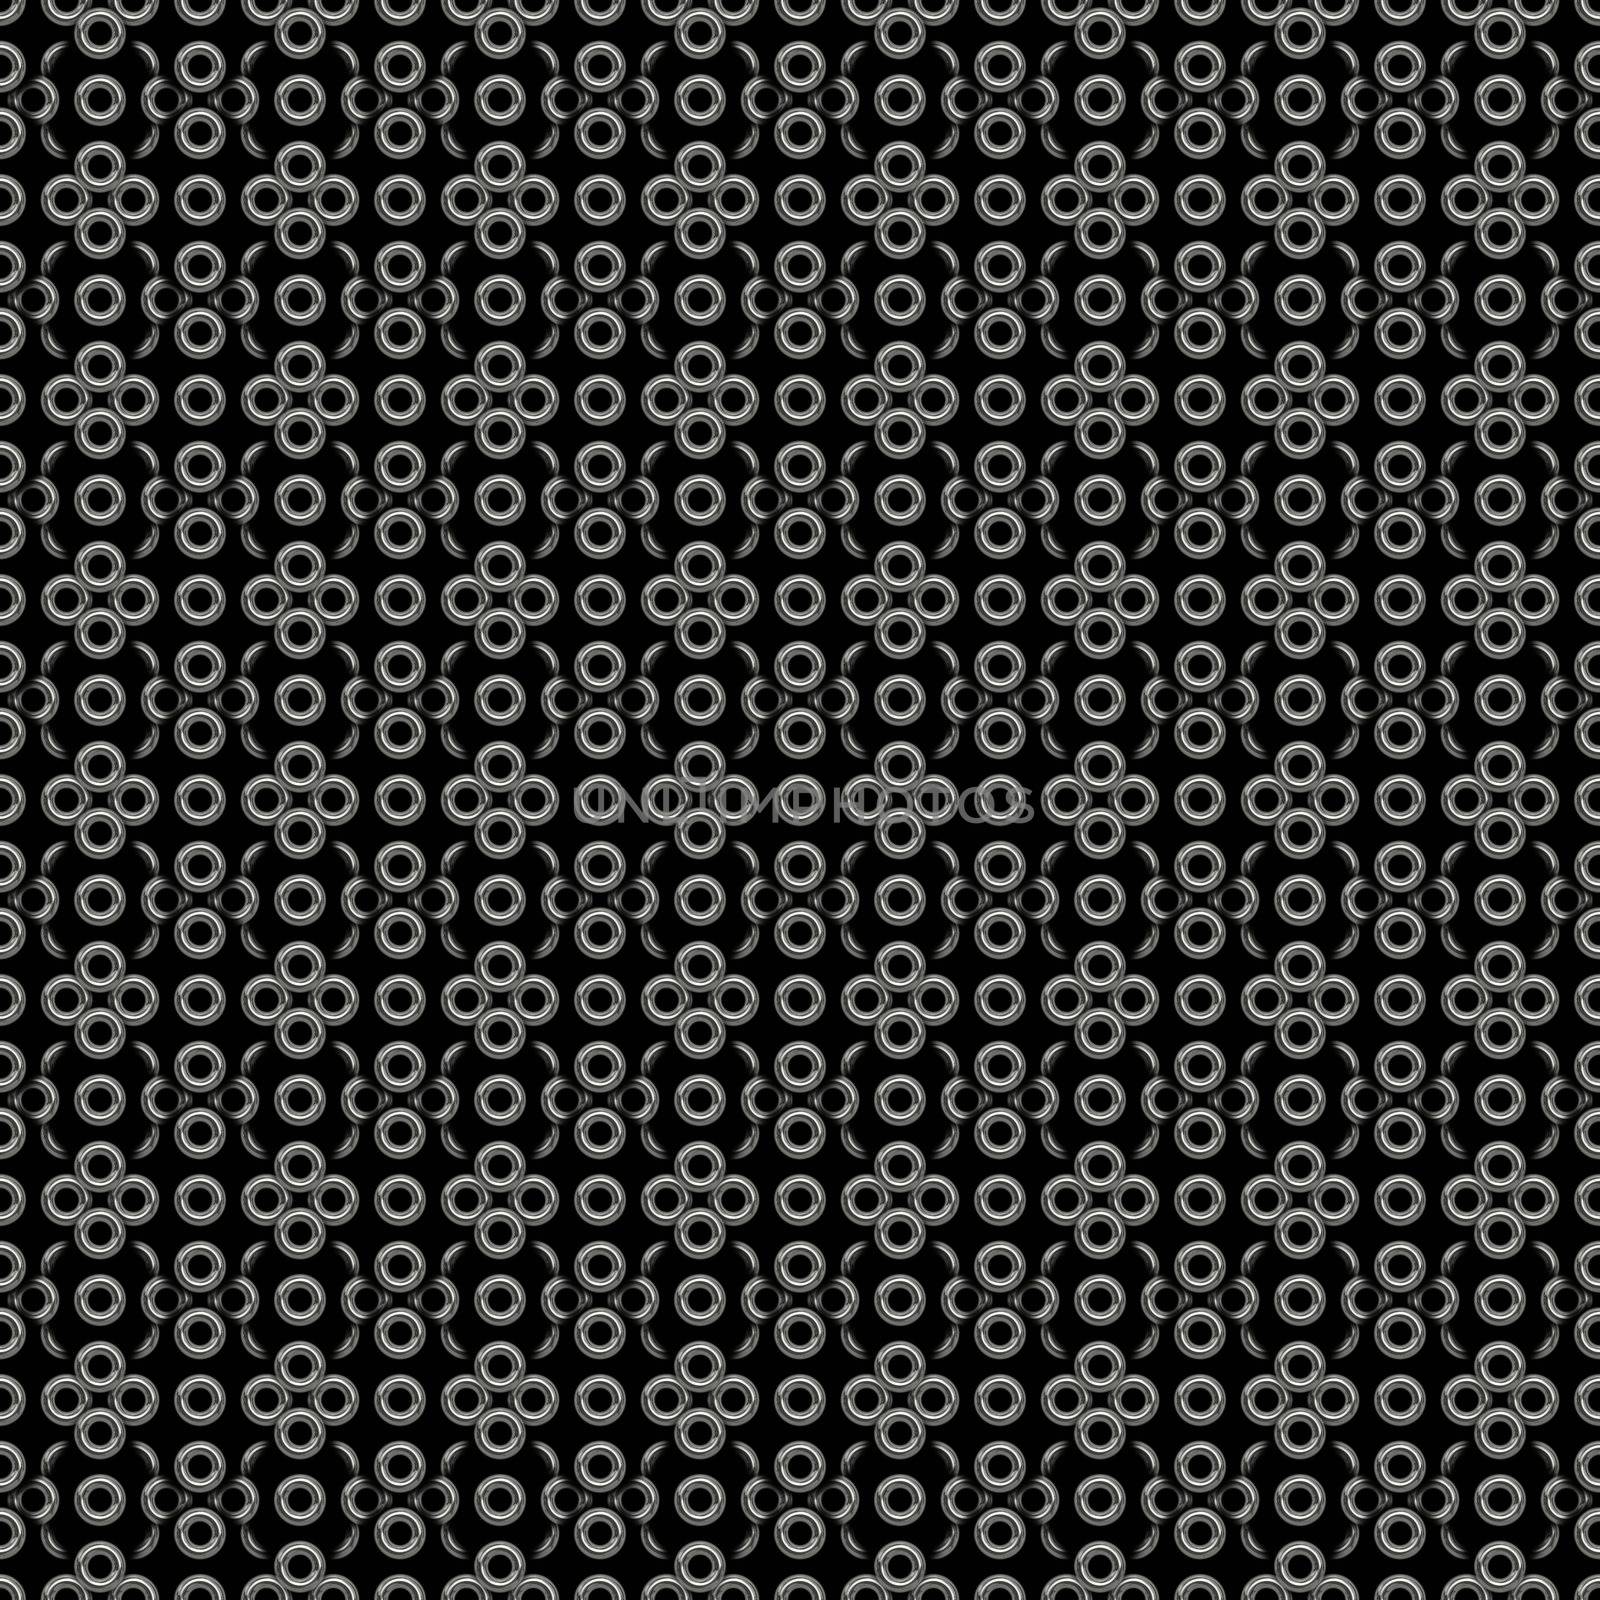 seamless texture of many silver rings om black background